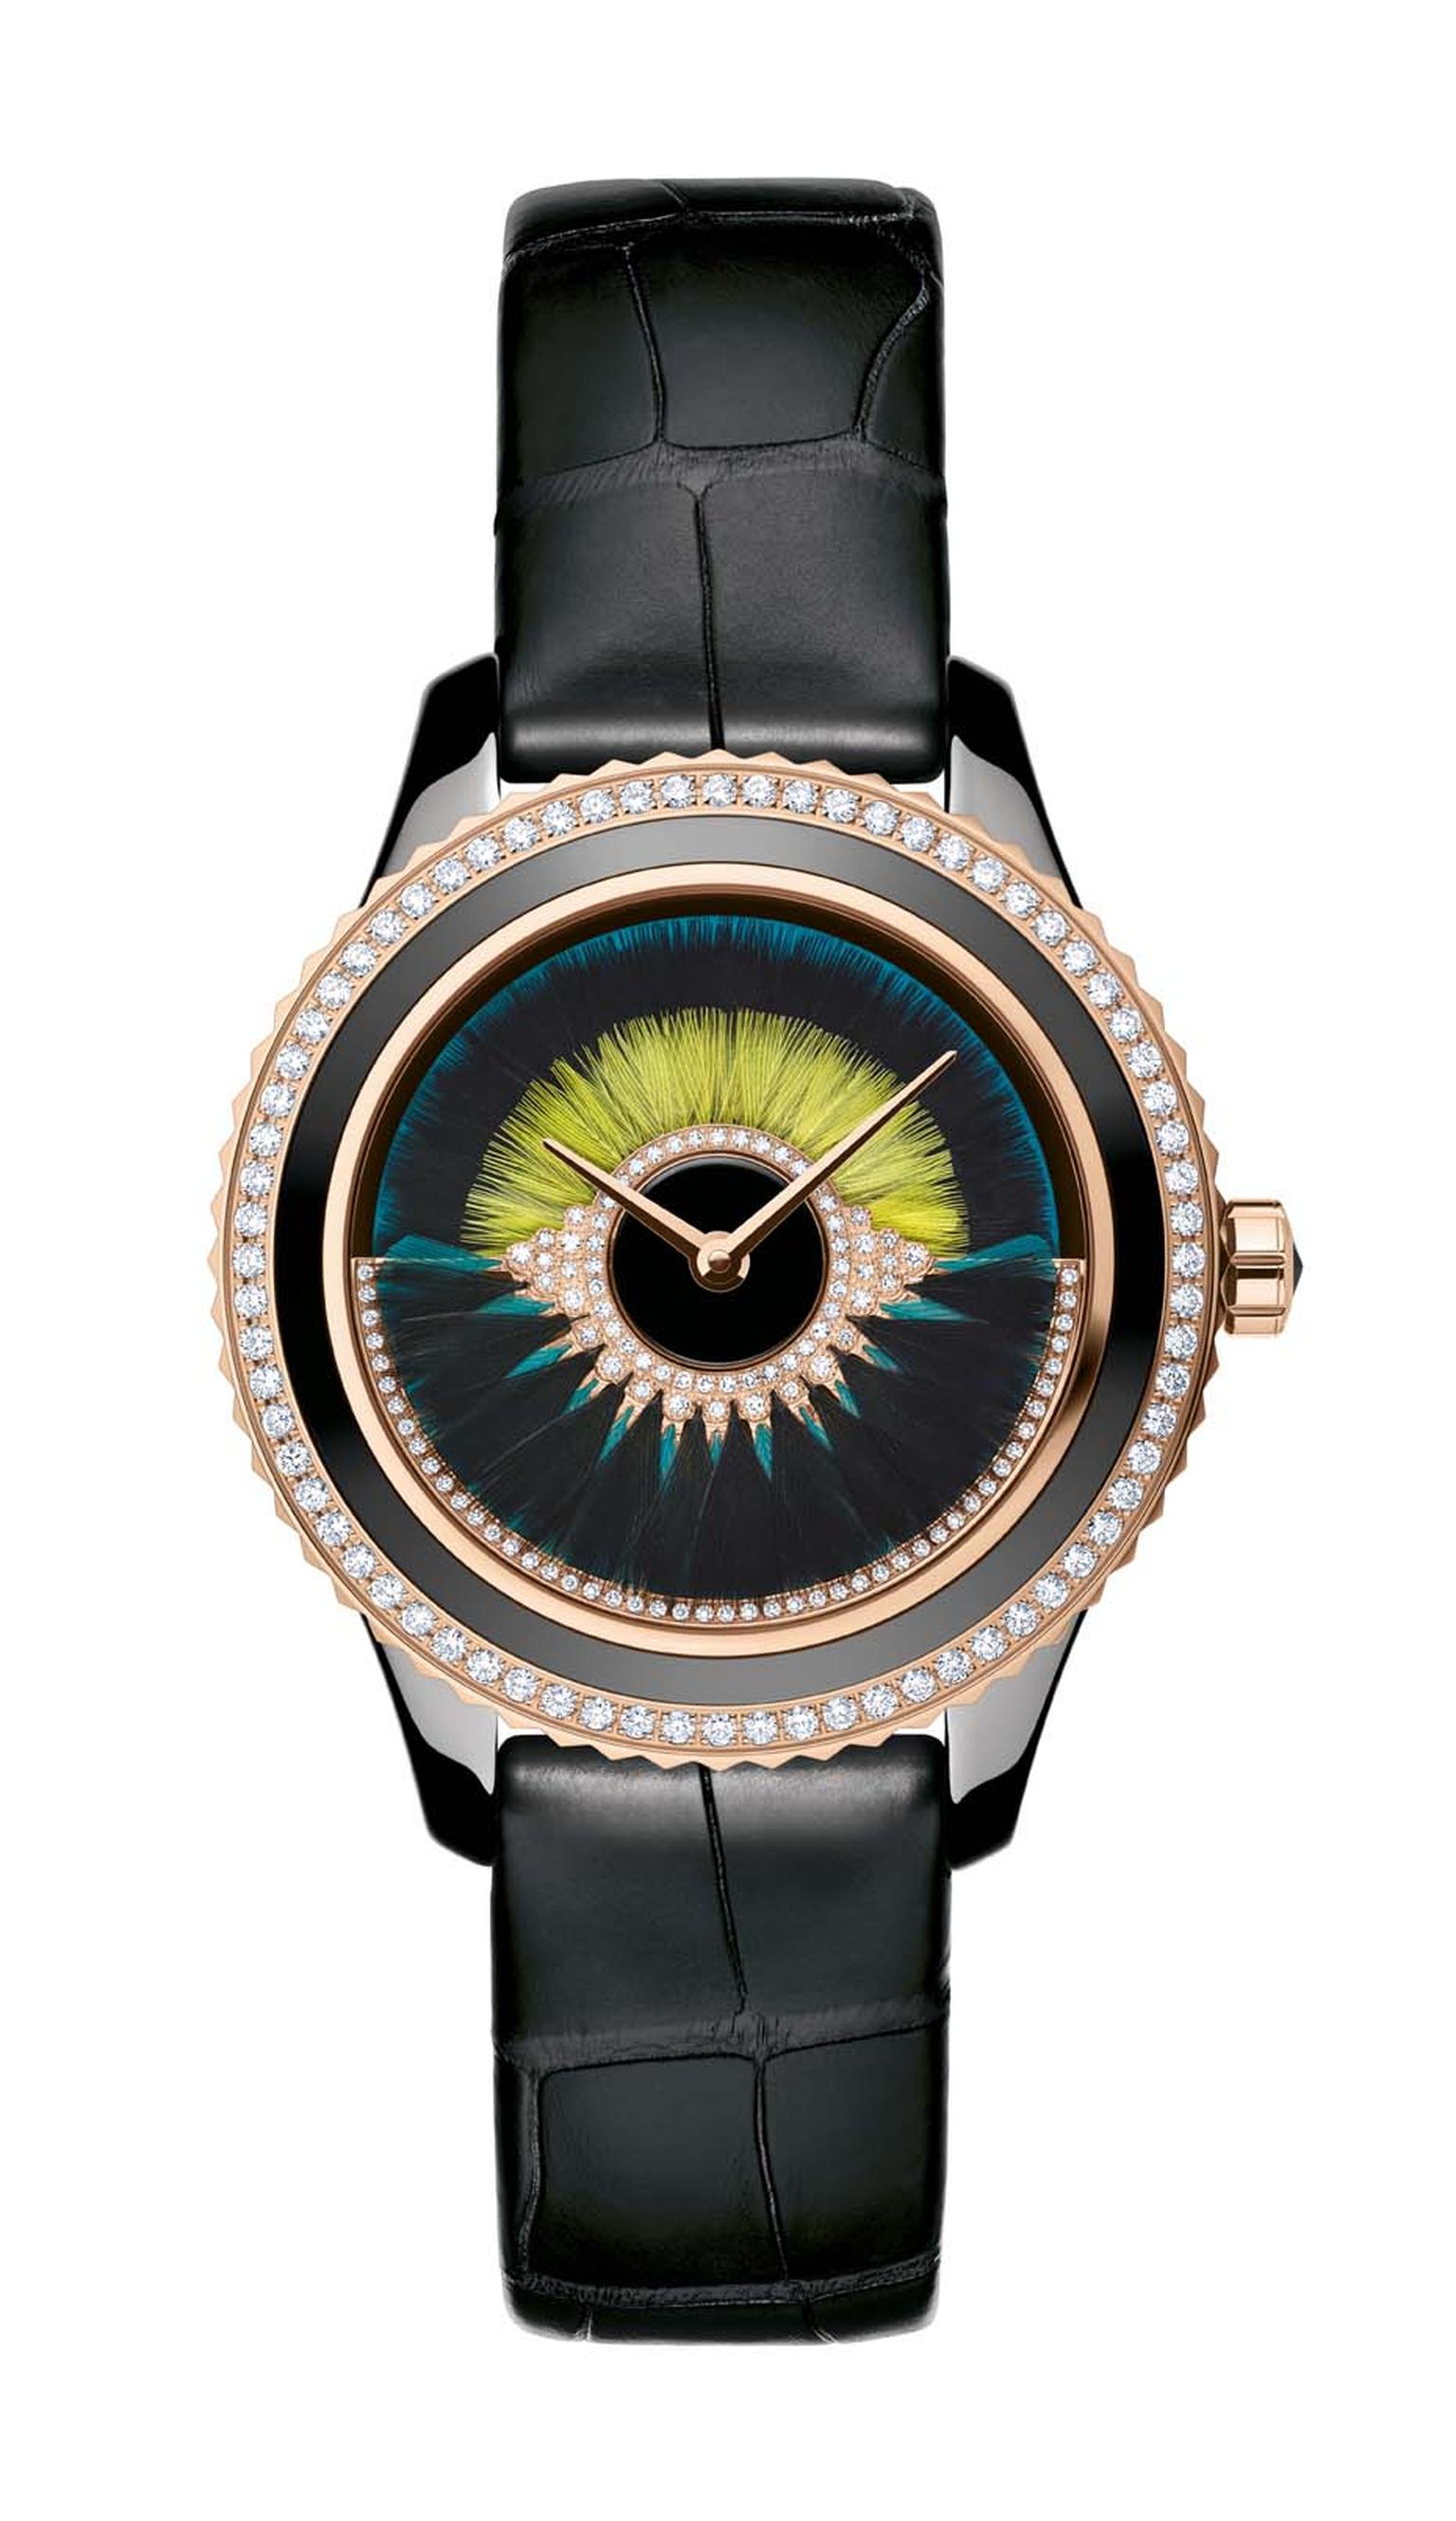 Dior VIII Grand Bal Cancan watch in a 38mm pink gold and black ceramic case with a peacock blue lacquered dial decorated with two rows of black and yellow feather marquetry. The oscillating weight on the dial swirls with peacock blue and black feathers an